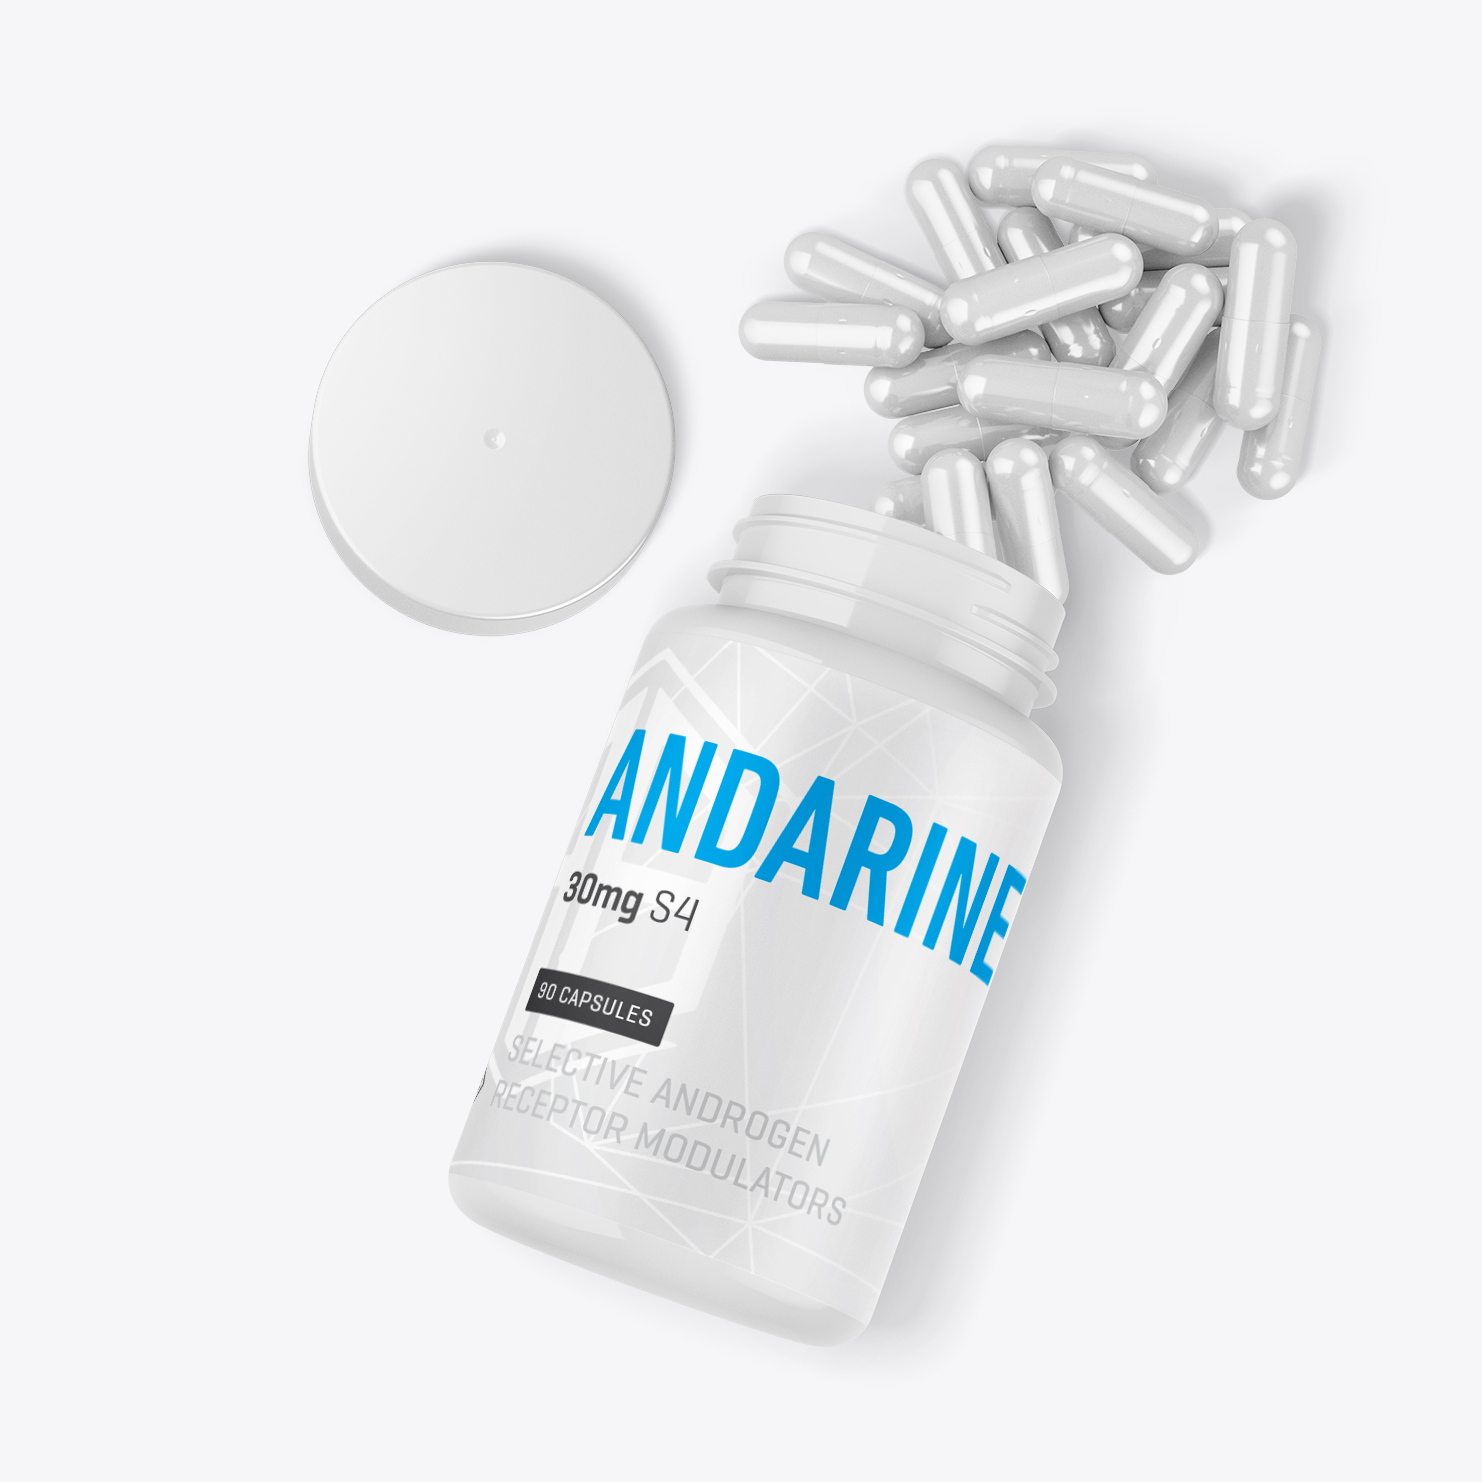 Andarine S4 SARMs Canada Capsules - Opened Bottle of Andarine with 90 capsules of 30mg